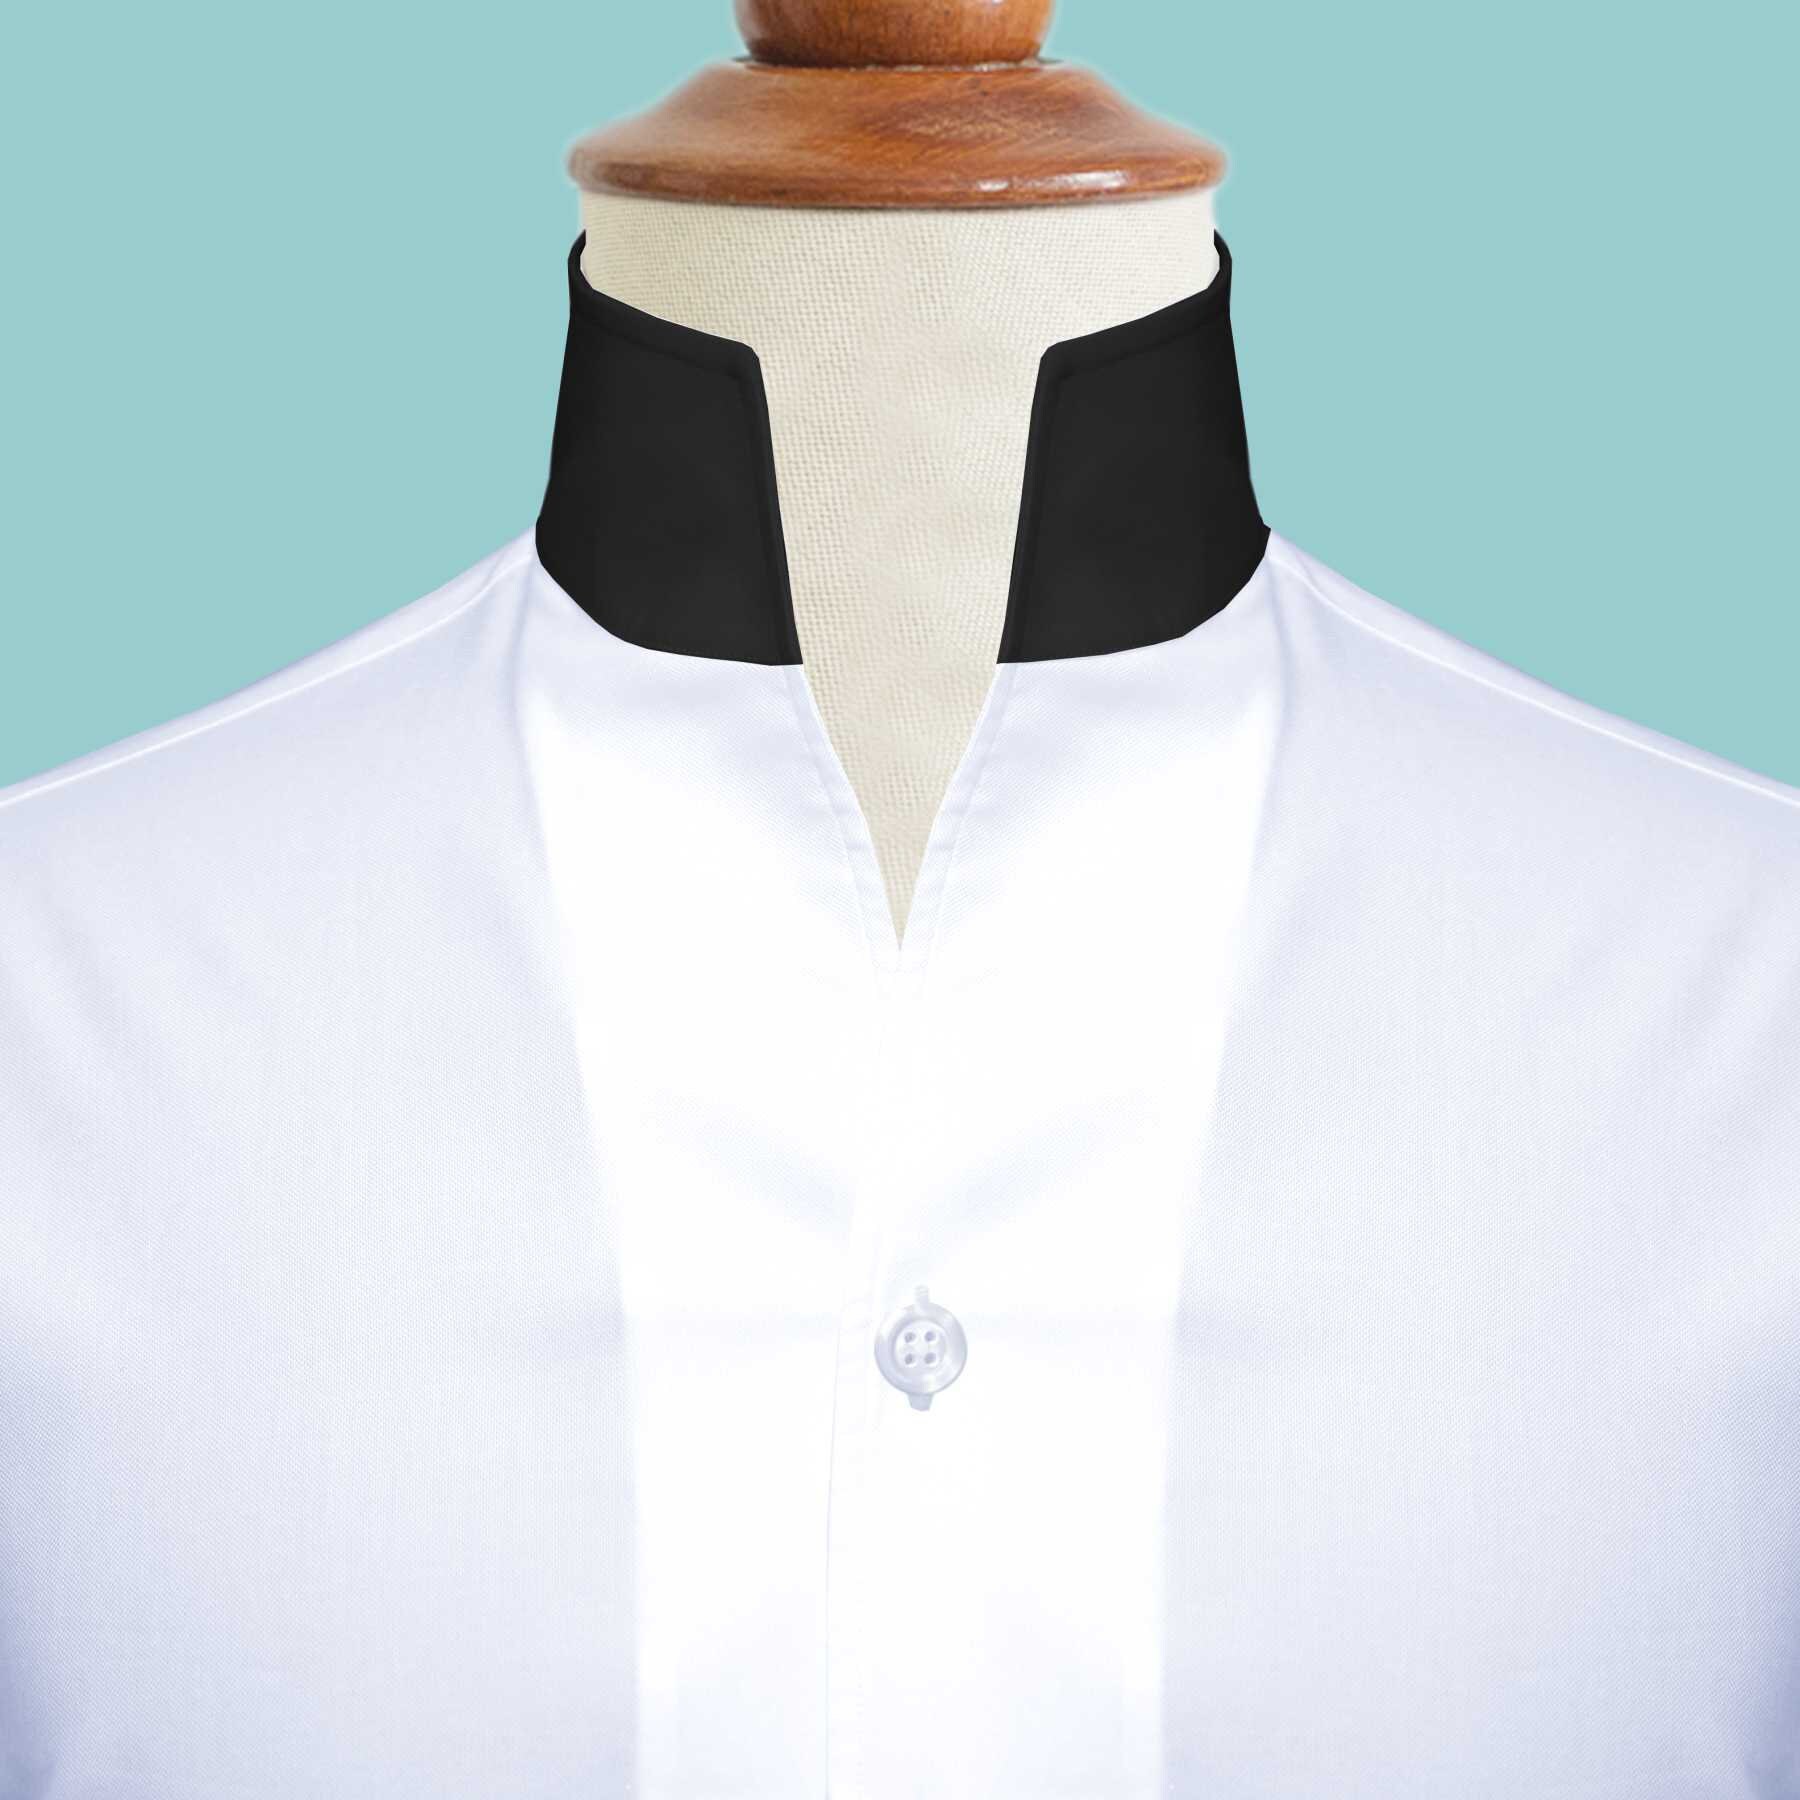  Men's High Collar, High Open Collar, White Shirt, Tall Neck  Collar, Wedding Party Shirt, Buttonless V Neck Collar (as1, Neck_Sleeve,  15_Point_5, 33, 34) : Clothing, Shoes & Jewelry